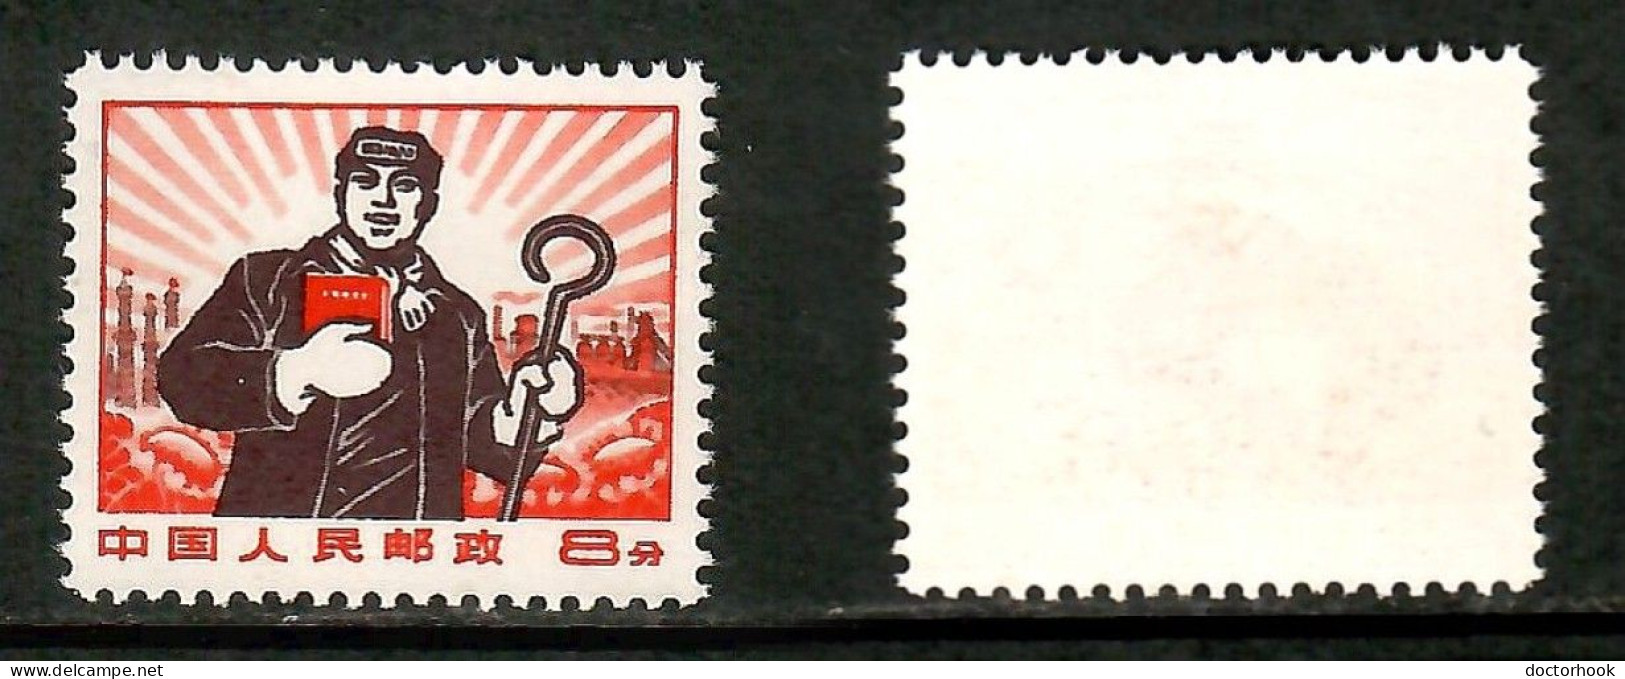 PEOPLES REPUBLIC Of CHINA   Scott # 1017a* MINT NO GUM AS ISSUED (CONDITION AS PER SCAN) (Stamp Scan # 1012-2) - Unused Stamps